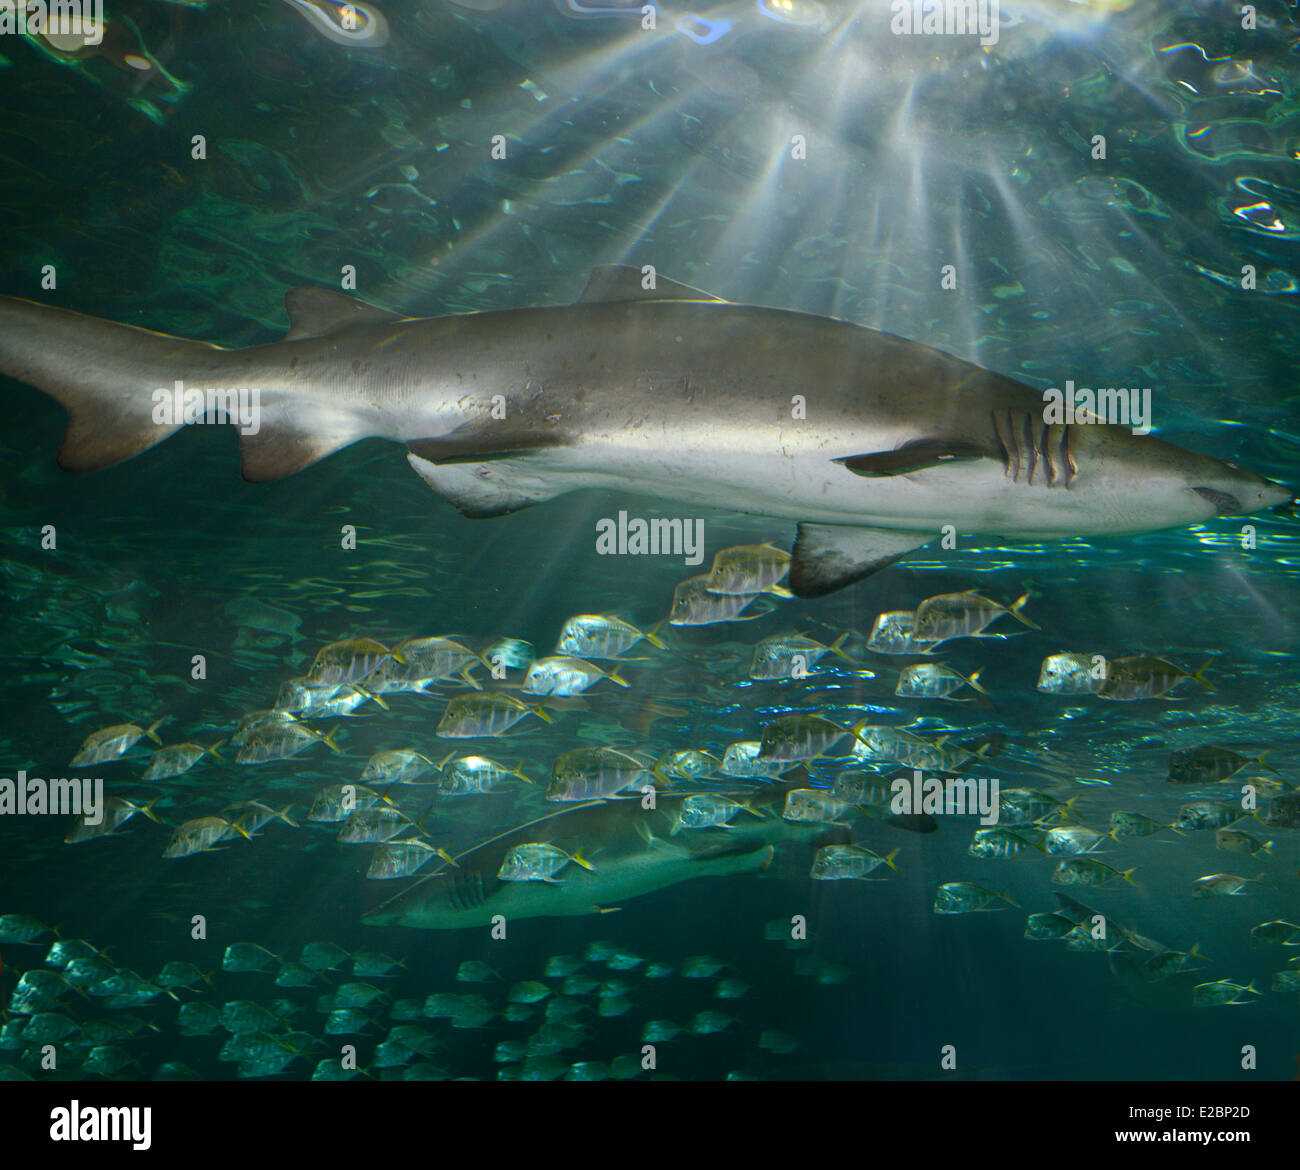 Sand Tiger Sharks swimming with school of Lookdown Fish with sunlight streaming from the surface Ripleys Aquarium Toronto Stock Photo